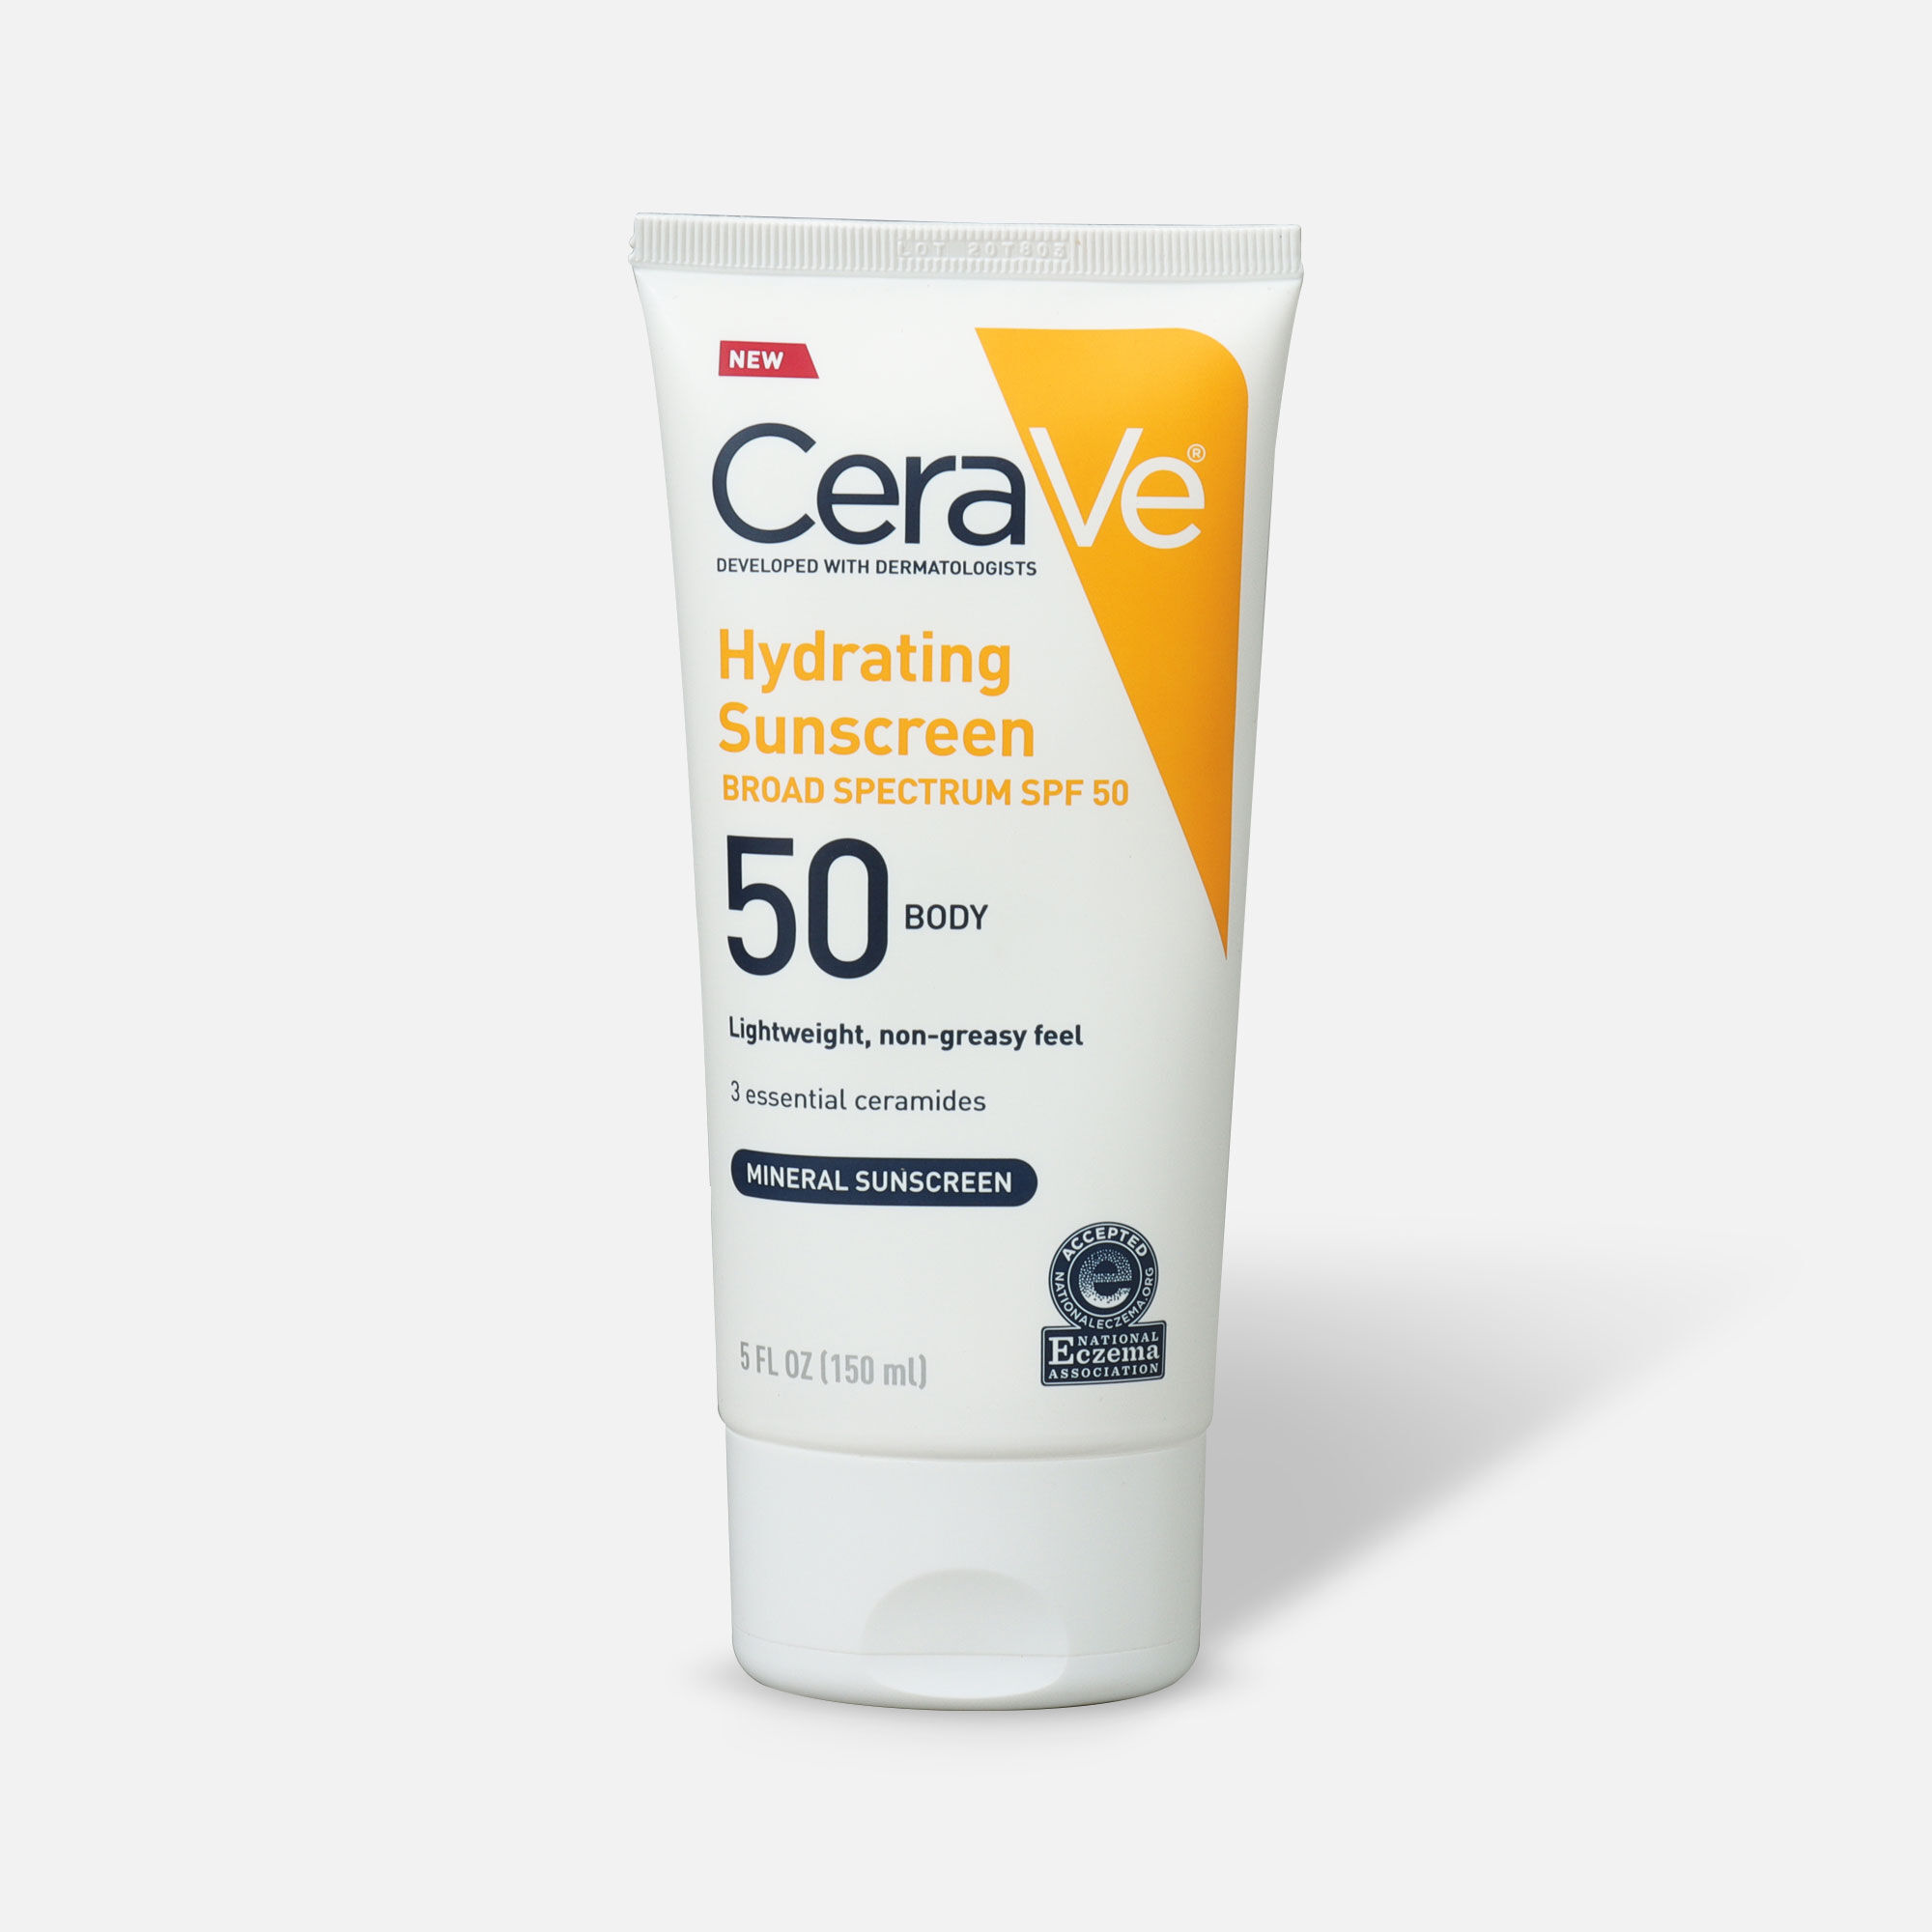 cerave tinted sunscreen with spf